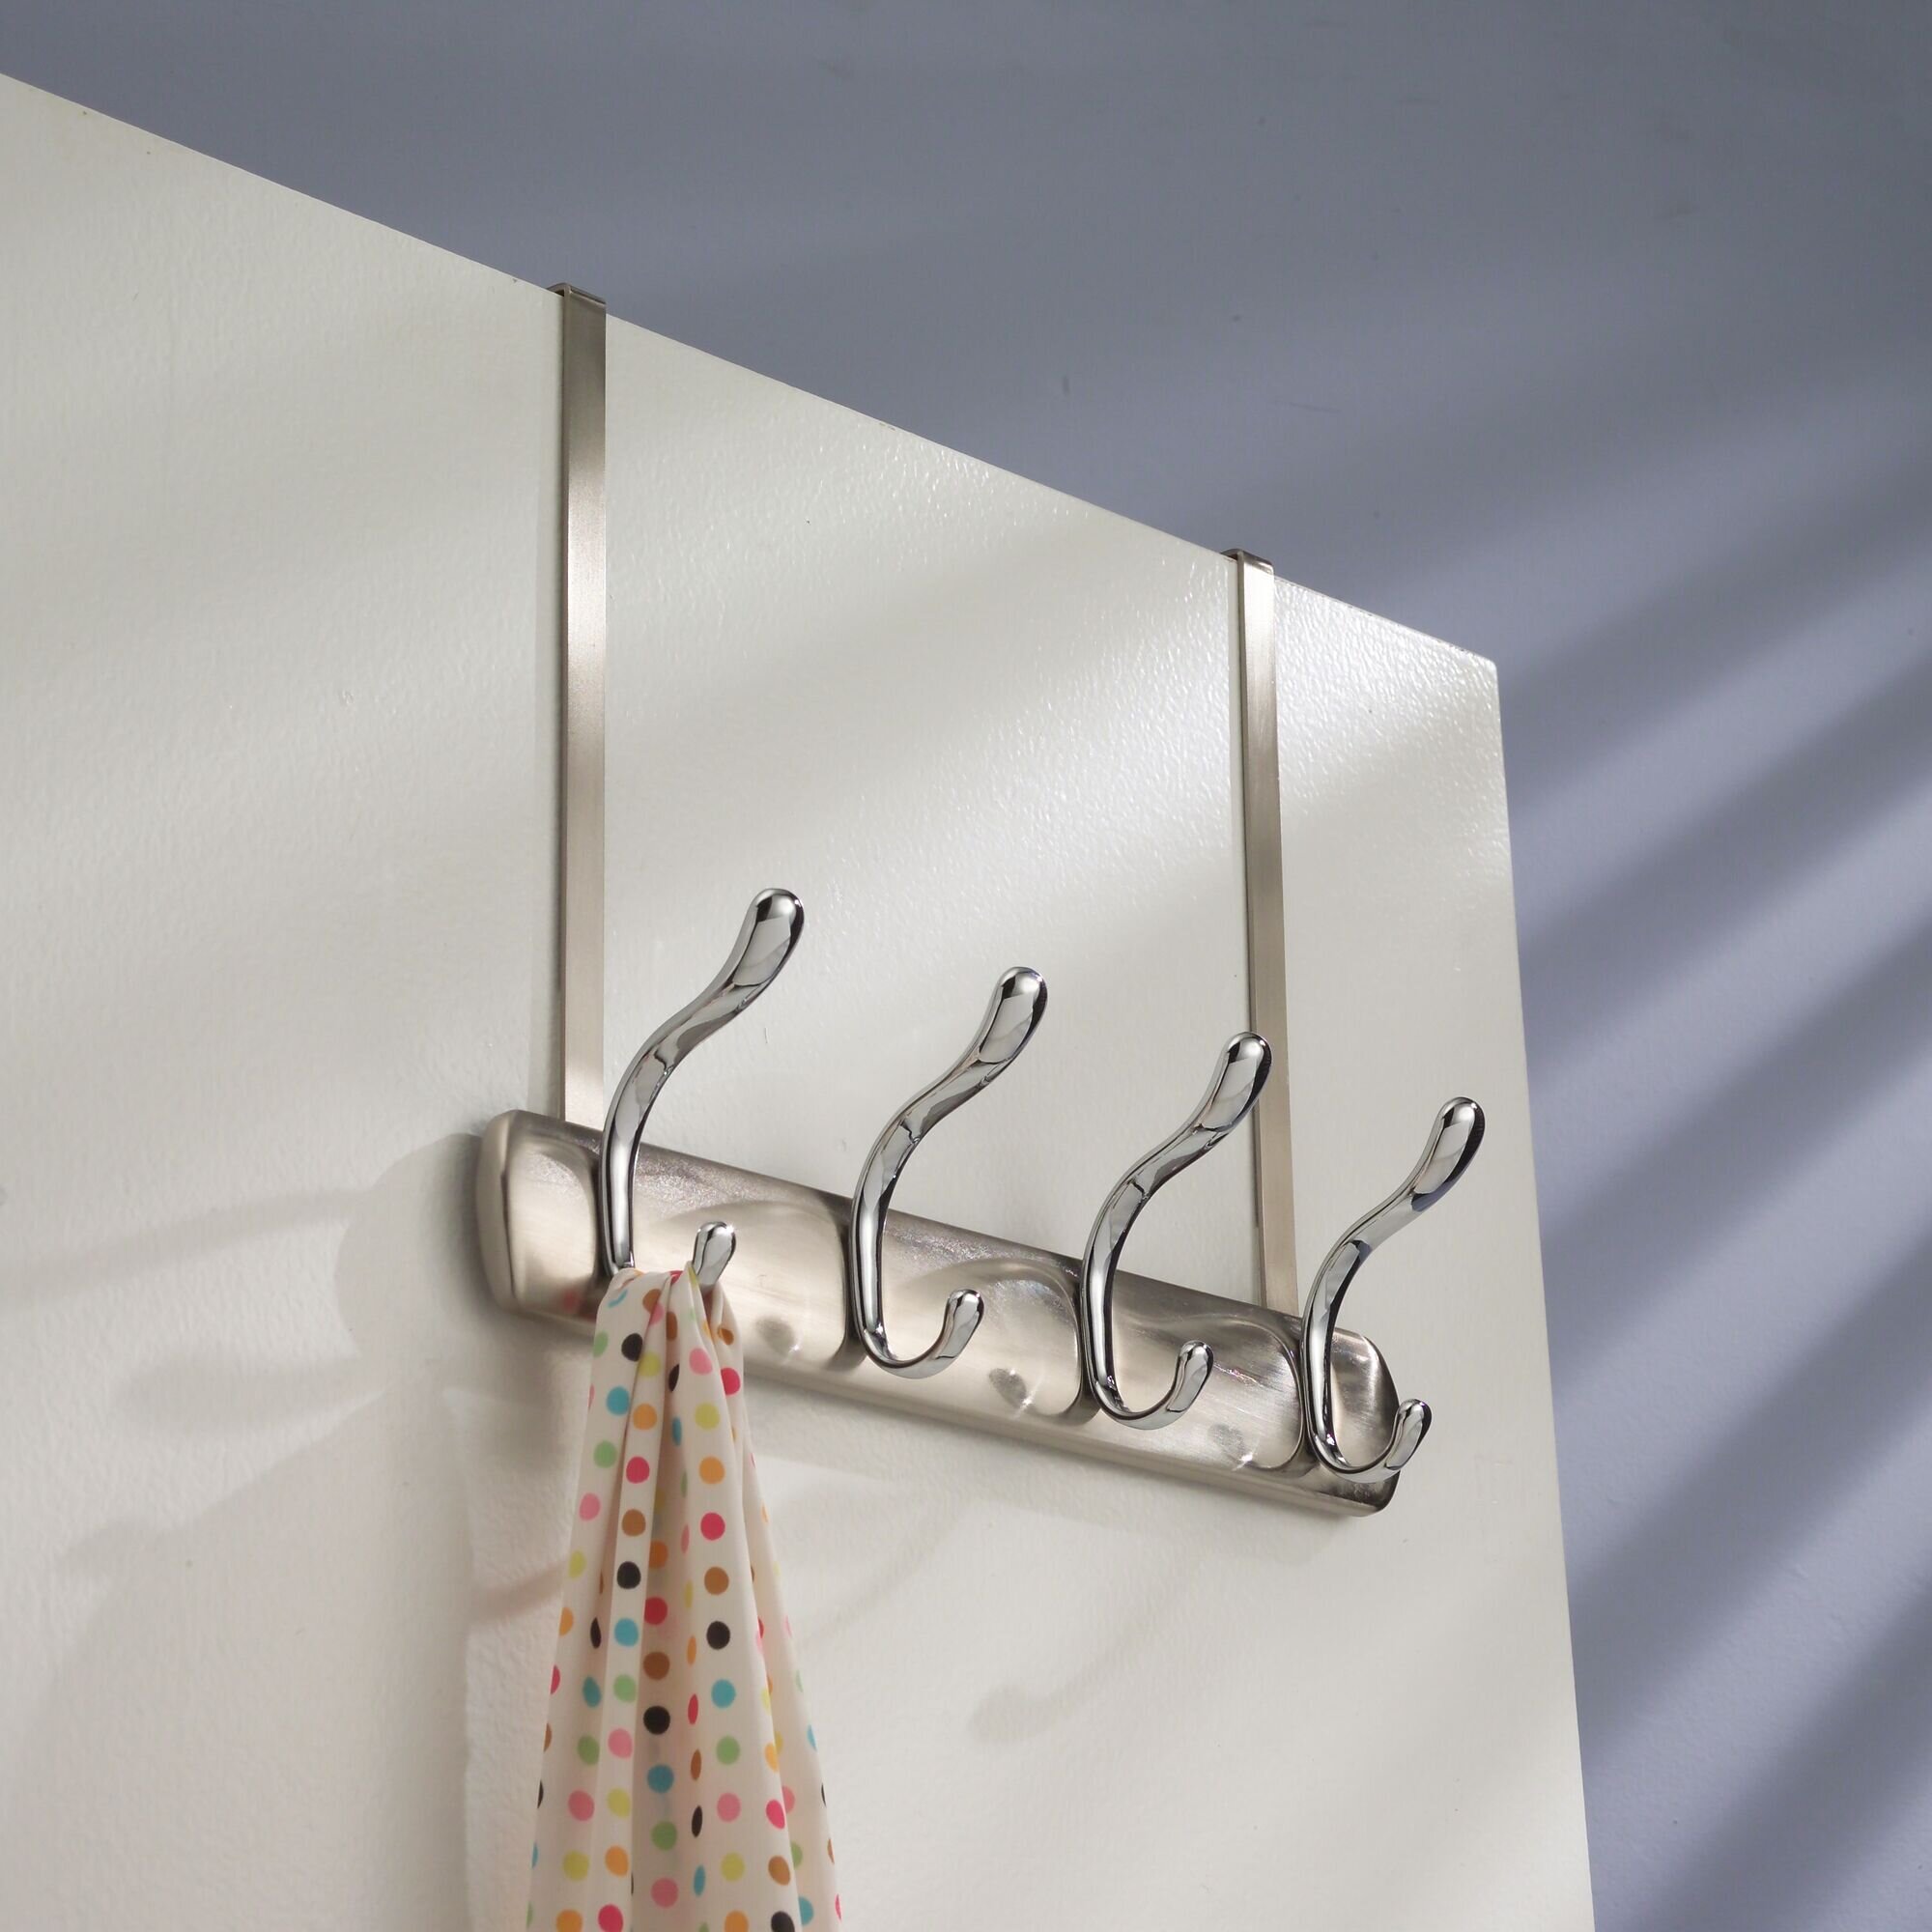 iDesign Stainless Steel Over the Cabinet Double Towel Bar